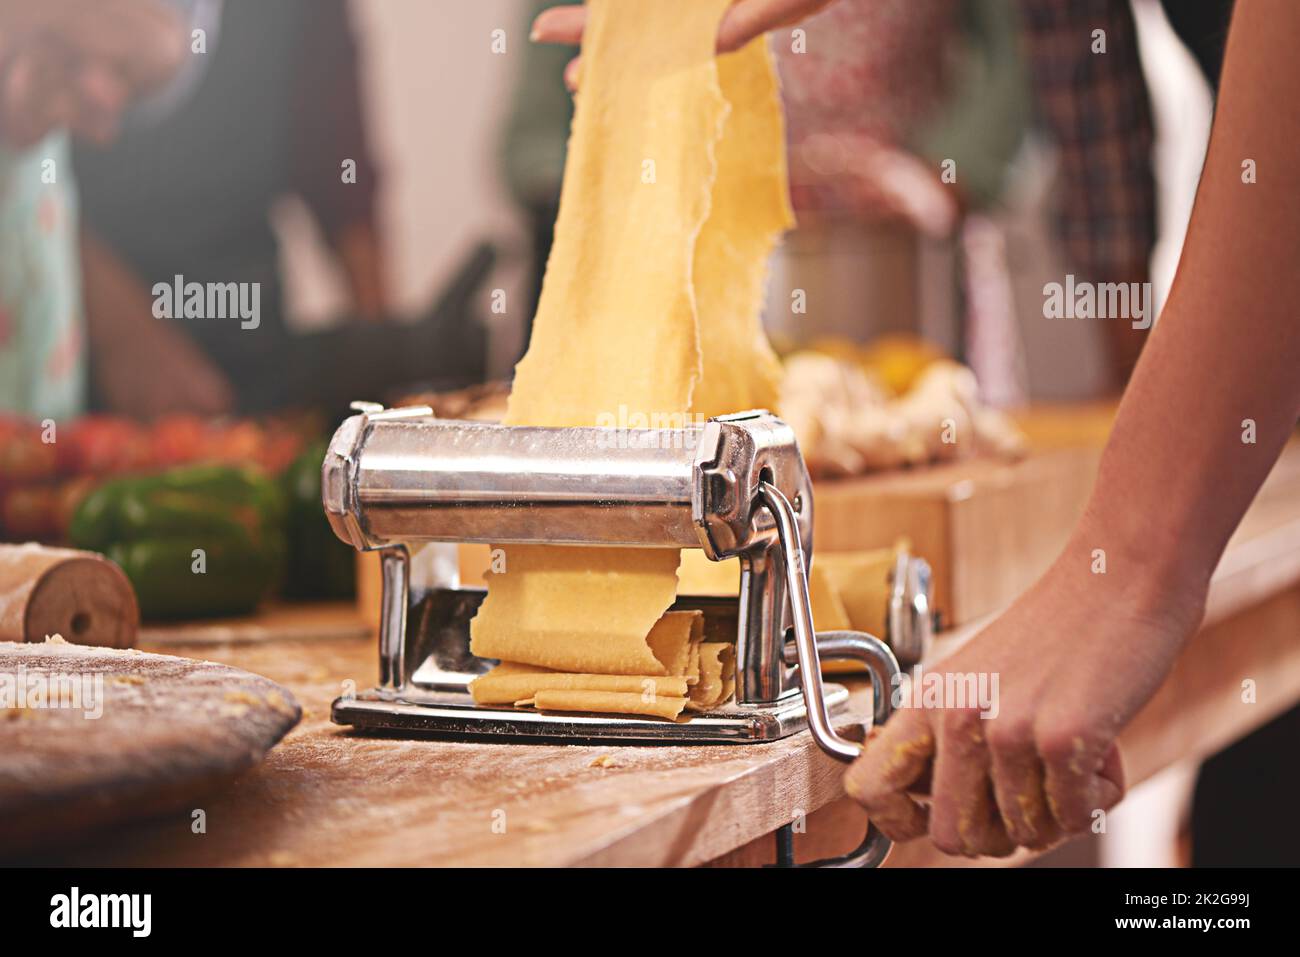 https://c8.alamy.com/comp/2K2G99J/getting-the-pasta-dish-rolling-cropped-shot-of-a-person-rolling-freshly-made-dough-through-a-pasta-maker-2K2G99J.jpg